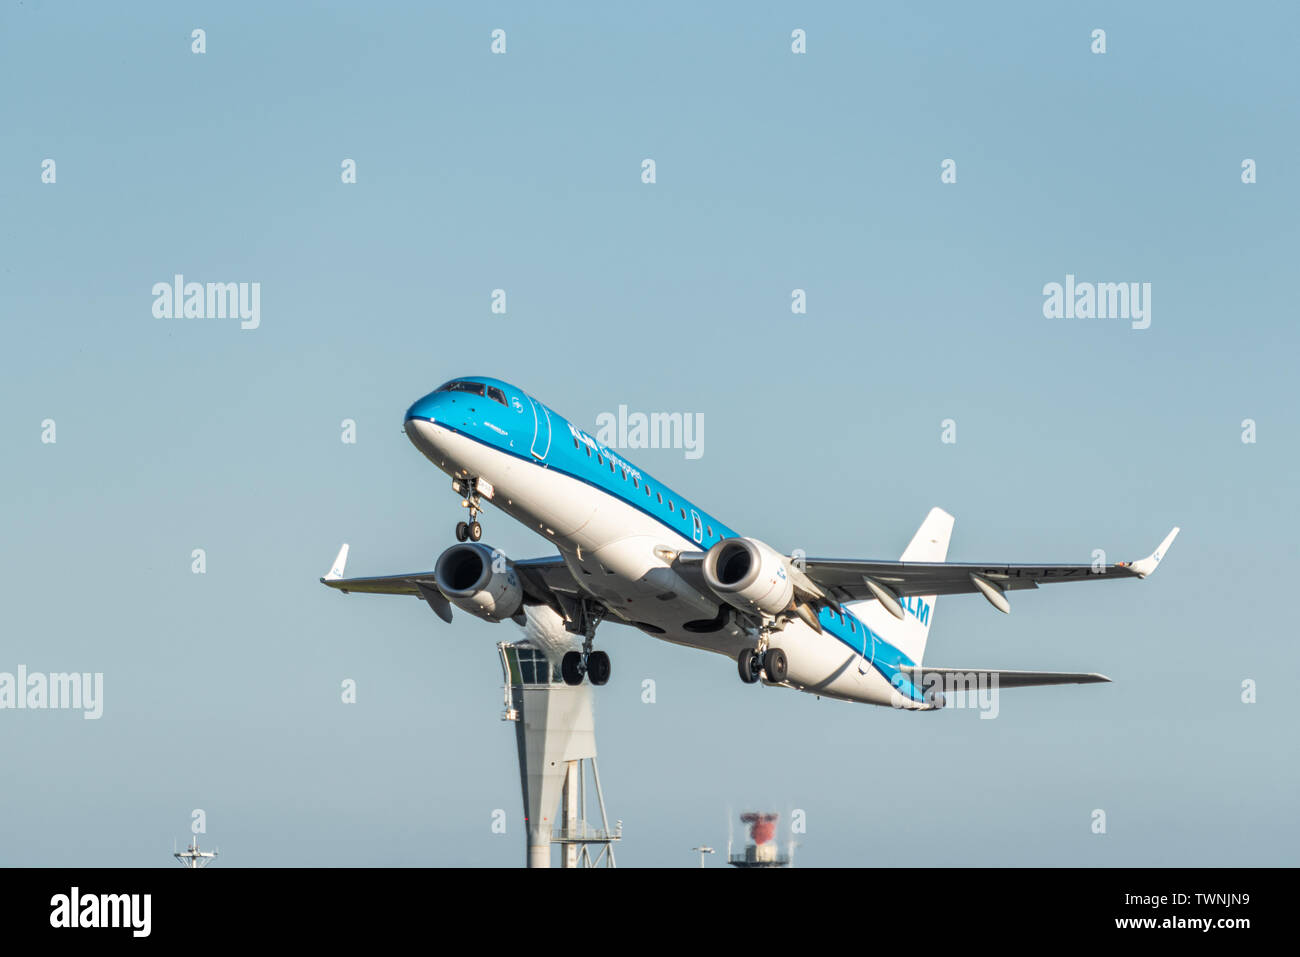 A picture of an KLM aircraft taking off from Schiphol airport Stock Photo